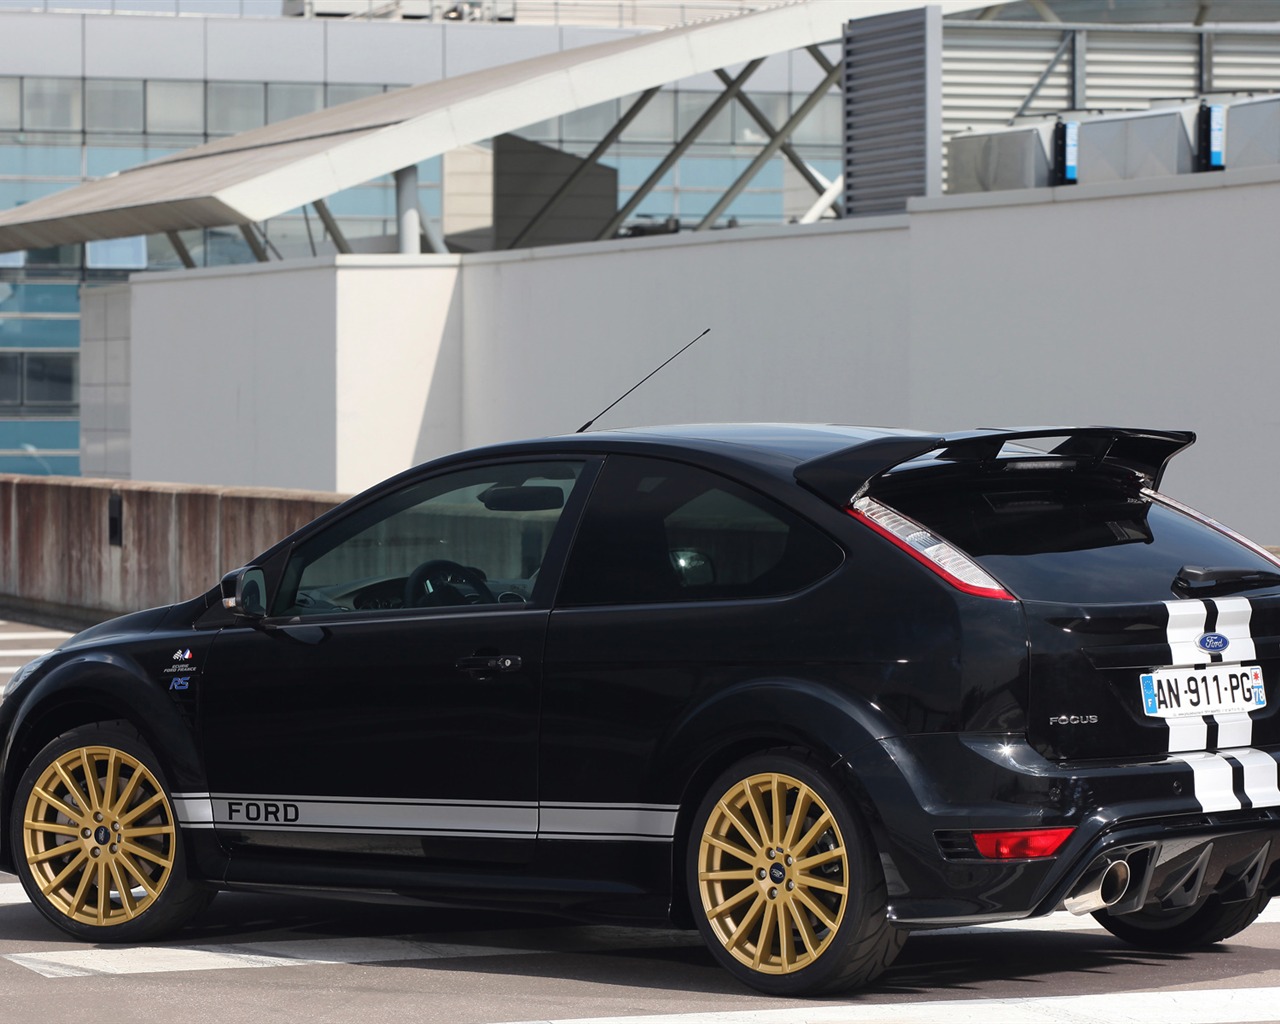 Ford Focus RS Le Mans Classic - 2010 福特3 - 1280x1024